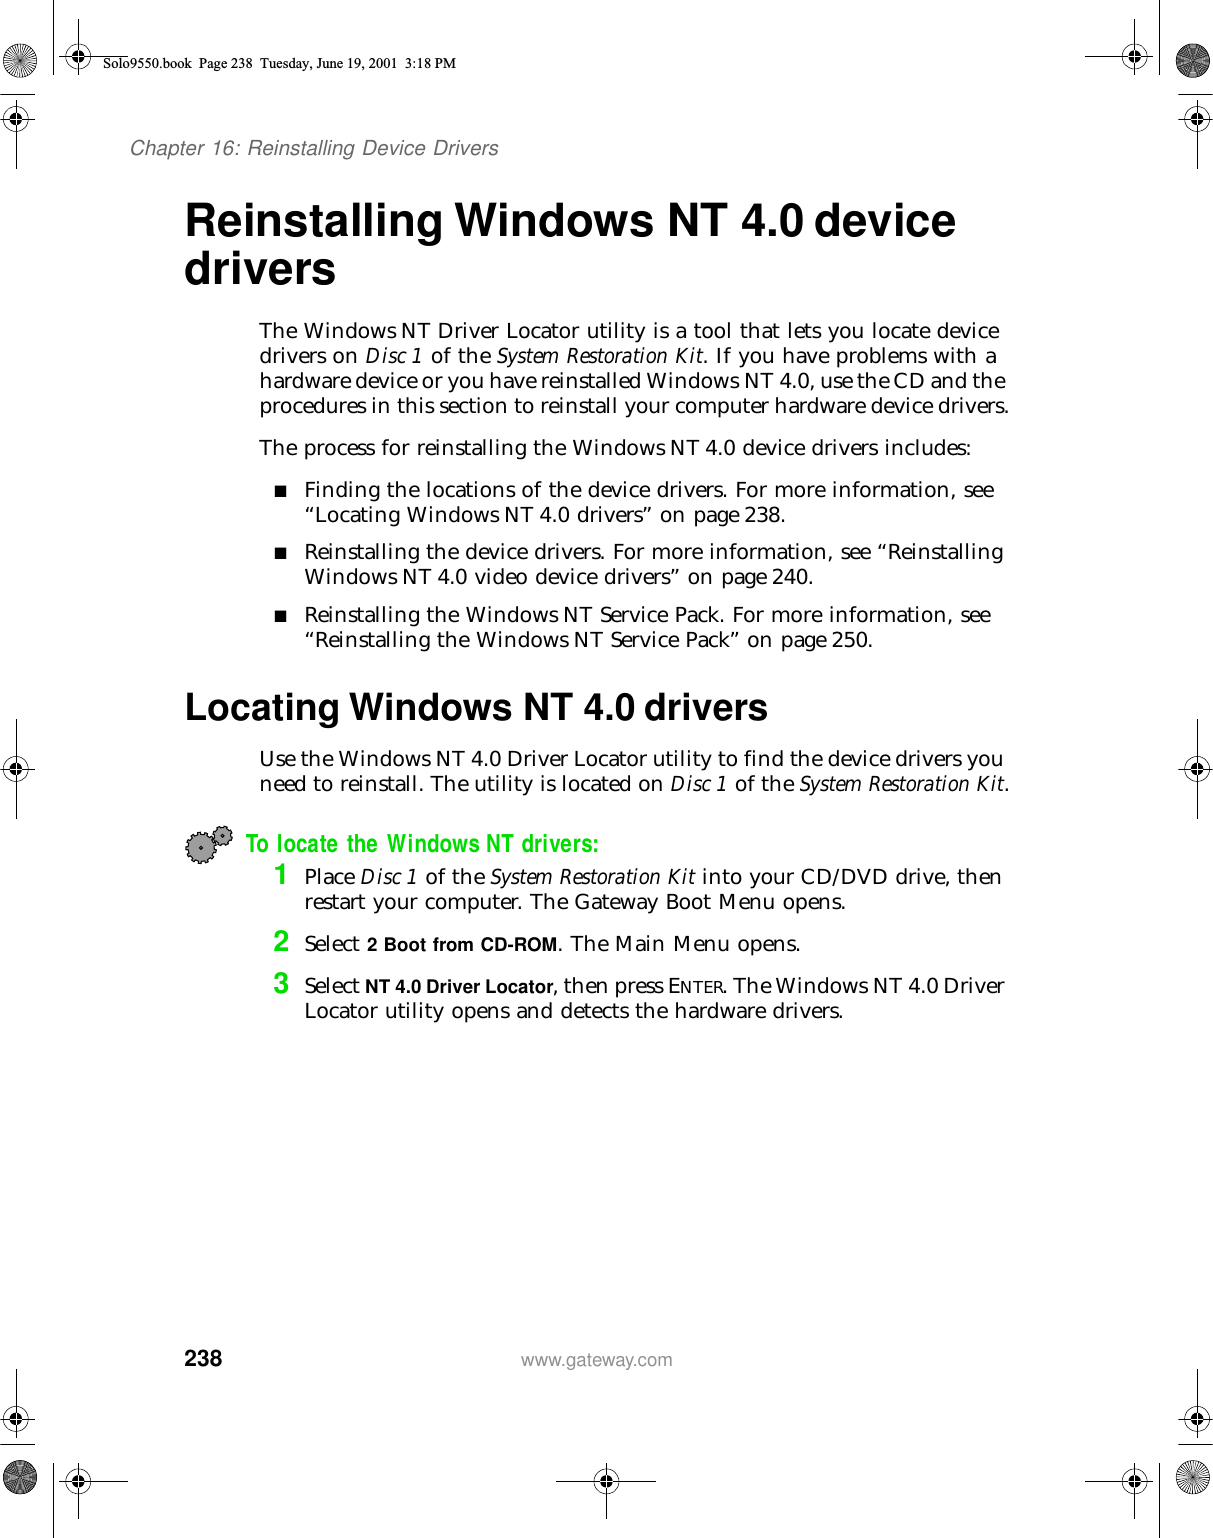 238Chapter 16: Reinstalling Device Driverswww.gateway.comReinstalling Windows NT 4.0 device driversThe Windows NT Driver Locator utility is a tool that lets you locate device drivers on Disc 1 of the System Restoration Kit. If you have problems with a hardware device or you have reinstalled Windows NT 4.0, use the CD and the procedures in this section to reinstall your computer hardware device drivers.The process for reinstalling the Windows NT 4.0 device drivers includes:■Finding the locations of the device drivers. For more information, see “Locating Windows NT 4.0 drivers” on page 238.■Reinstalling the device drivers. For more information, see “Reinstalling Windows NT 4.0 video device drivers” on page 240.■Reinstalling the Windows NT Service Pack. For more information, see “Reinstalling the Windows NT Service Pack” on page 250.Locating Windows NT 4.0 driversUse the Windows NT 4.0 Driver Locator utility to find the device drivers you need to reinstall. The utility is located on Disc 1 of the System Restoration Kit.To locate the Windows NT drivers:1Place Disc 1 of the System Restoration Kit into your CD/DVD drive, then restart your computer. The Gateway Boot Menu opens.2Select 2 Boot from CD-ROM. The Main Menu opens.3Select NT 4.0 Driver Locator, then press ENTER. The Windows NT 4.0 Driver Locator utility opens and detects the hardware drivers.Solo9550.book Page 238 Tuesday, June 19, 2001 3:18 PM